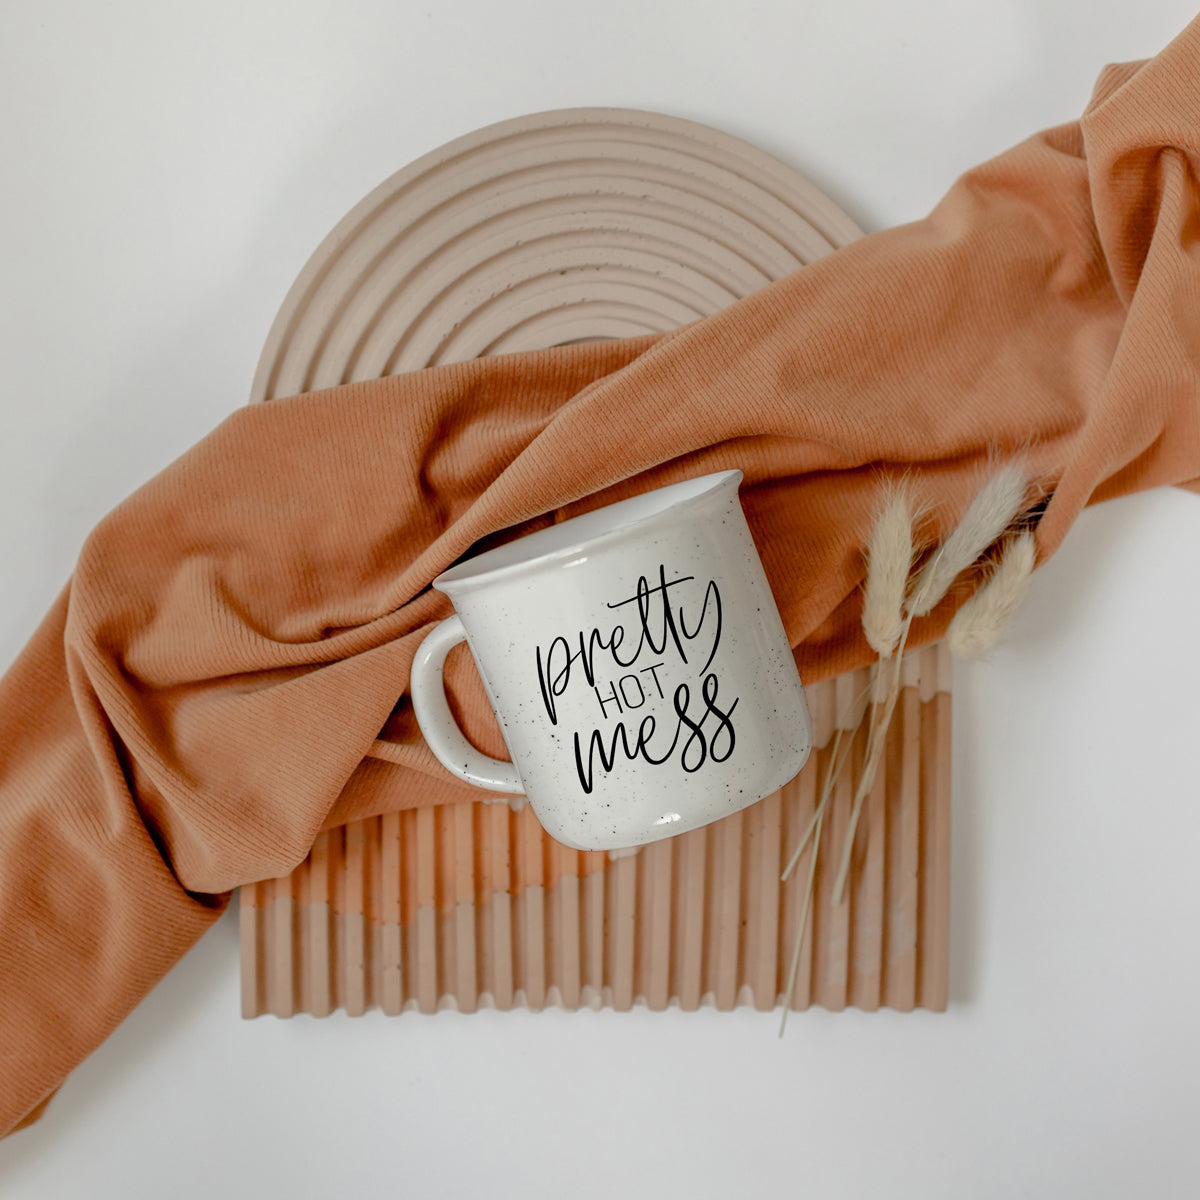 Hot mess Quote Gifts Modern